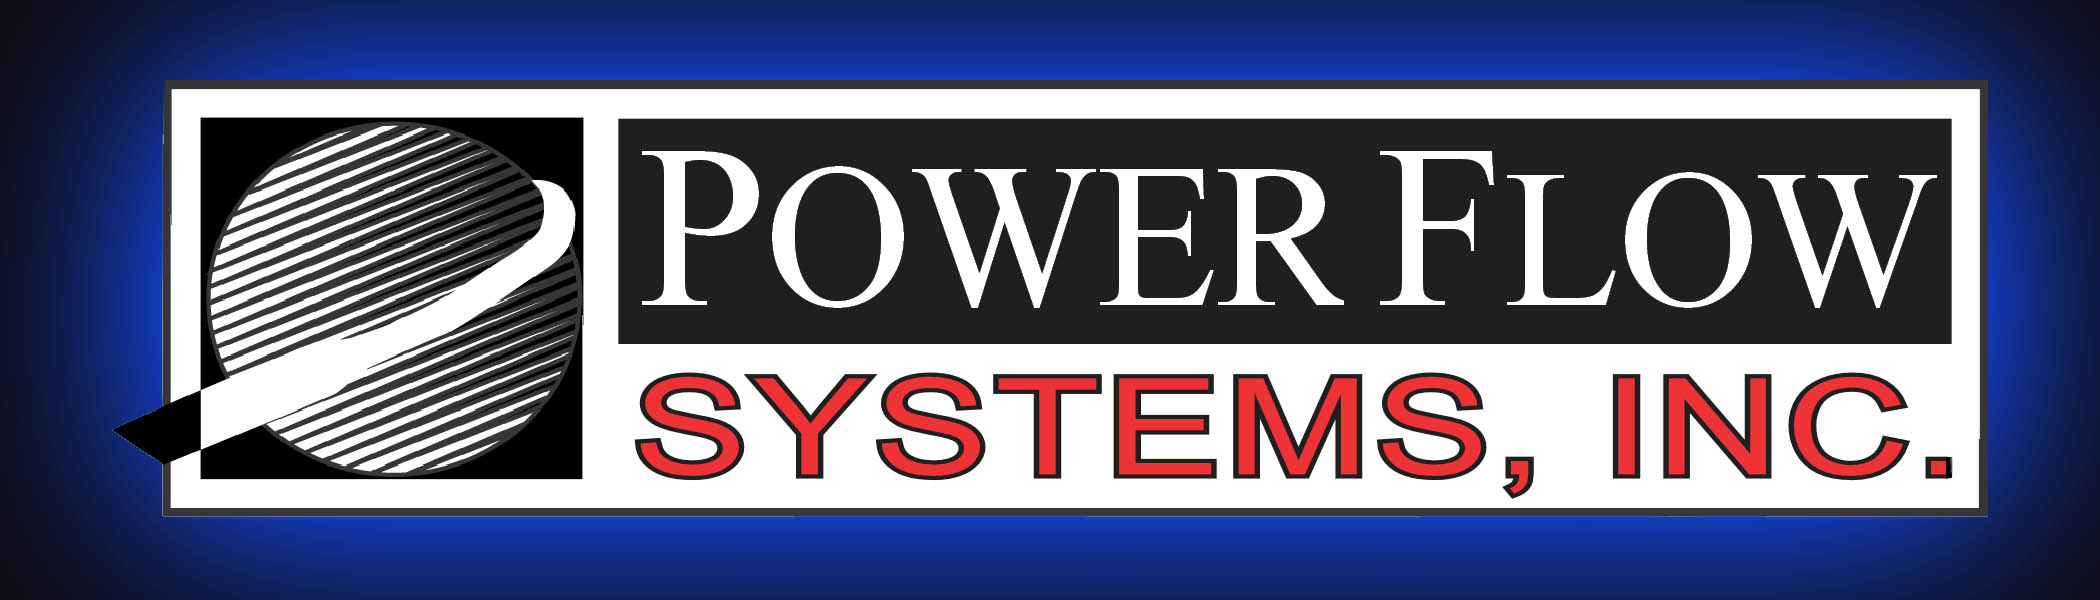 Power Flow Systems, Inc.